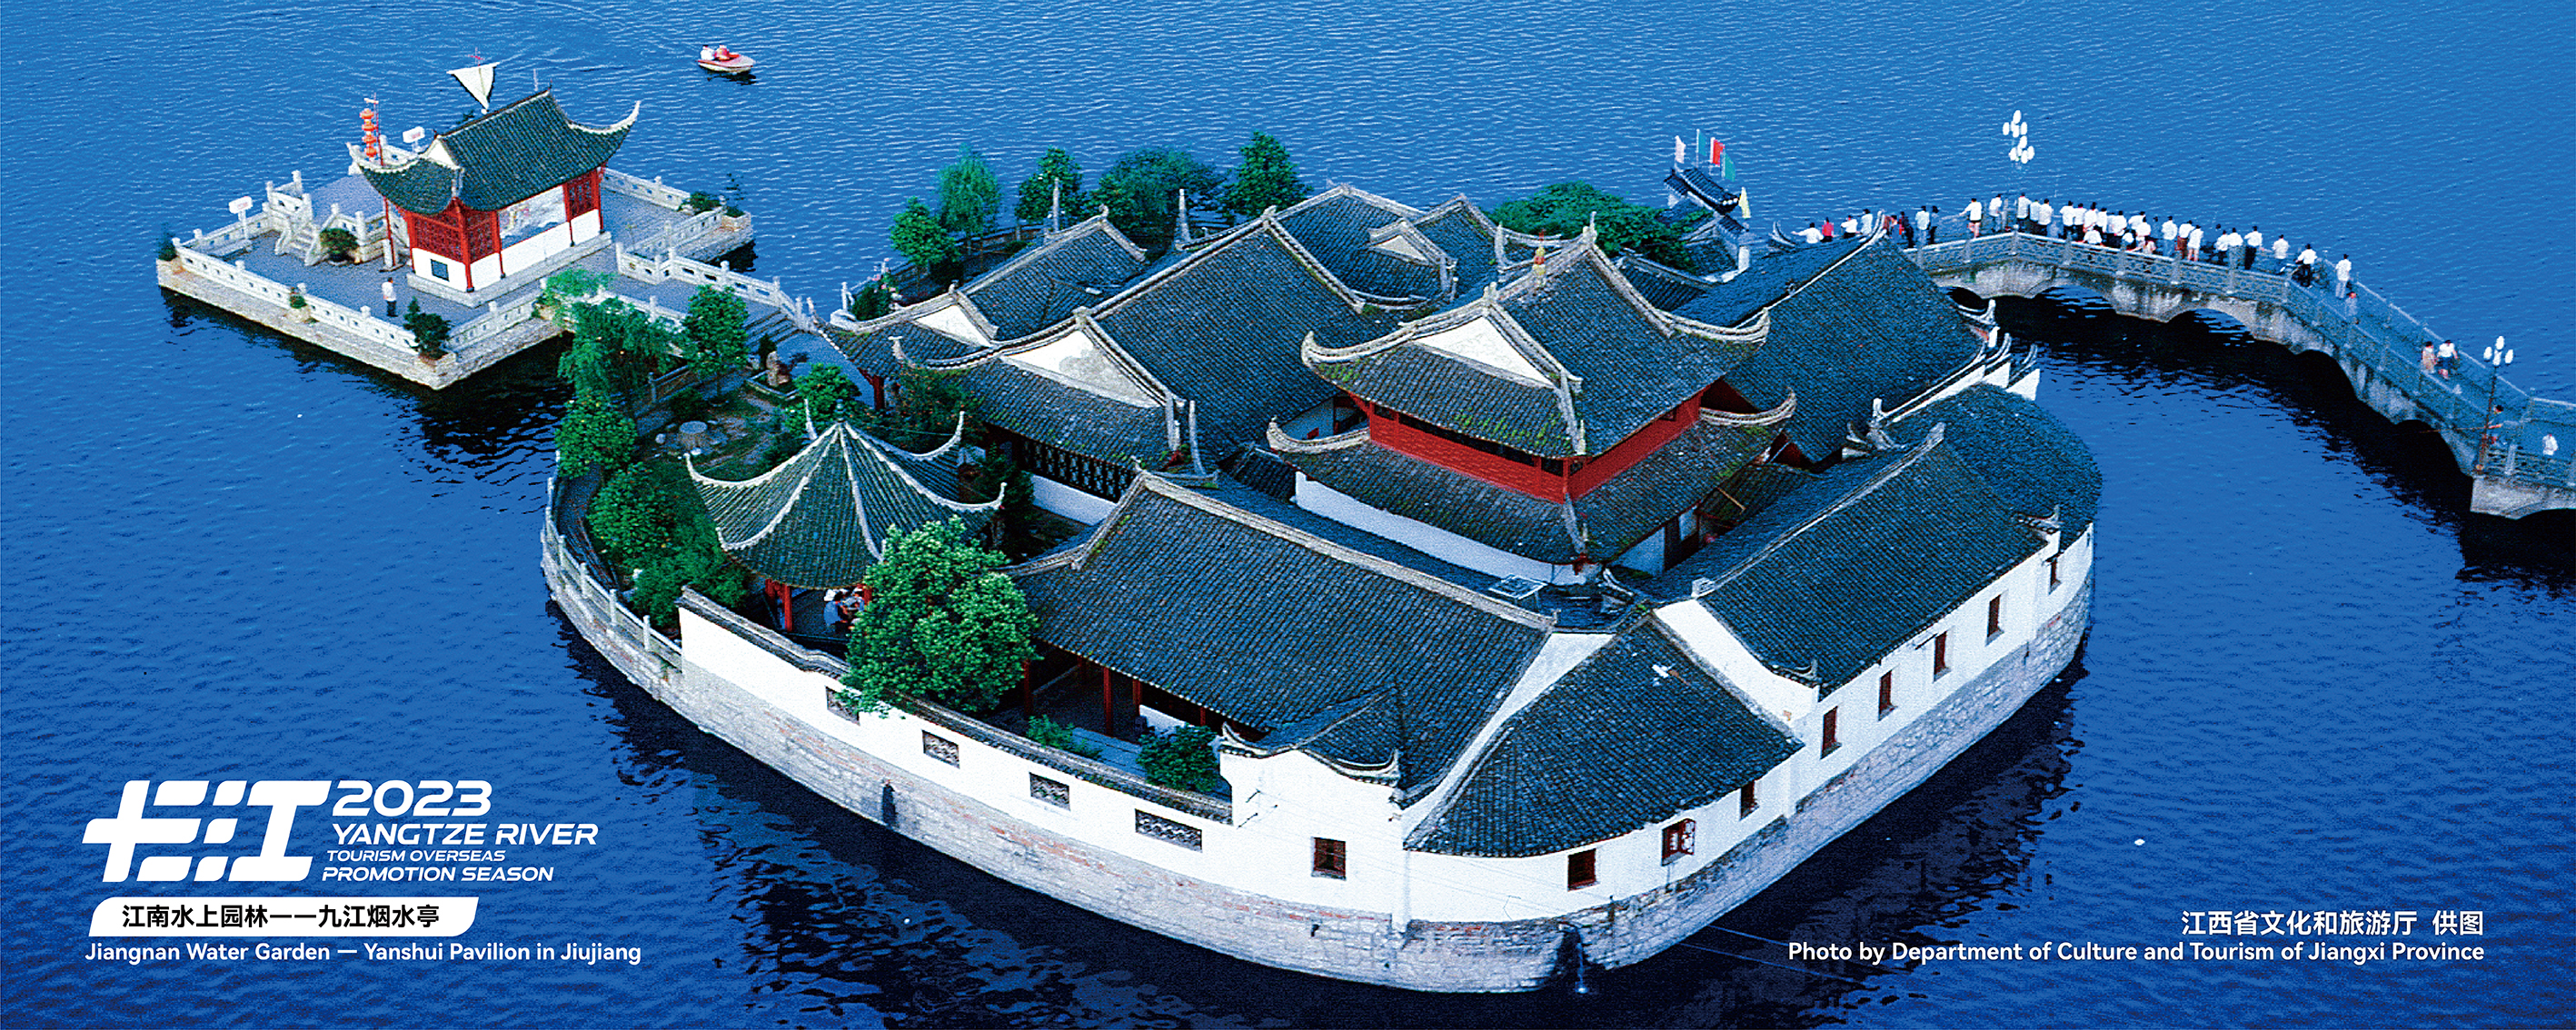 An undated photo shows a pavilion complex at Gantang Lake, located on the southern bank of the Yangtze River in Jiujiang, east China's Jiangxi Province. This building complex featuring grey tiles and white walls, was once a famous gathering venue for literati in ancient times. /Photo provided to CGTN